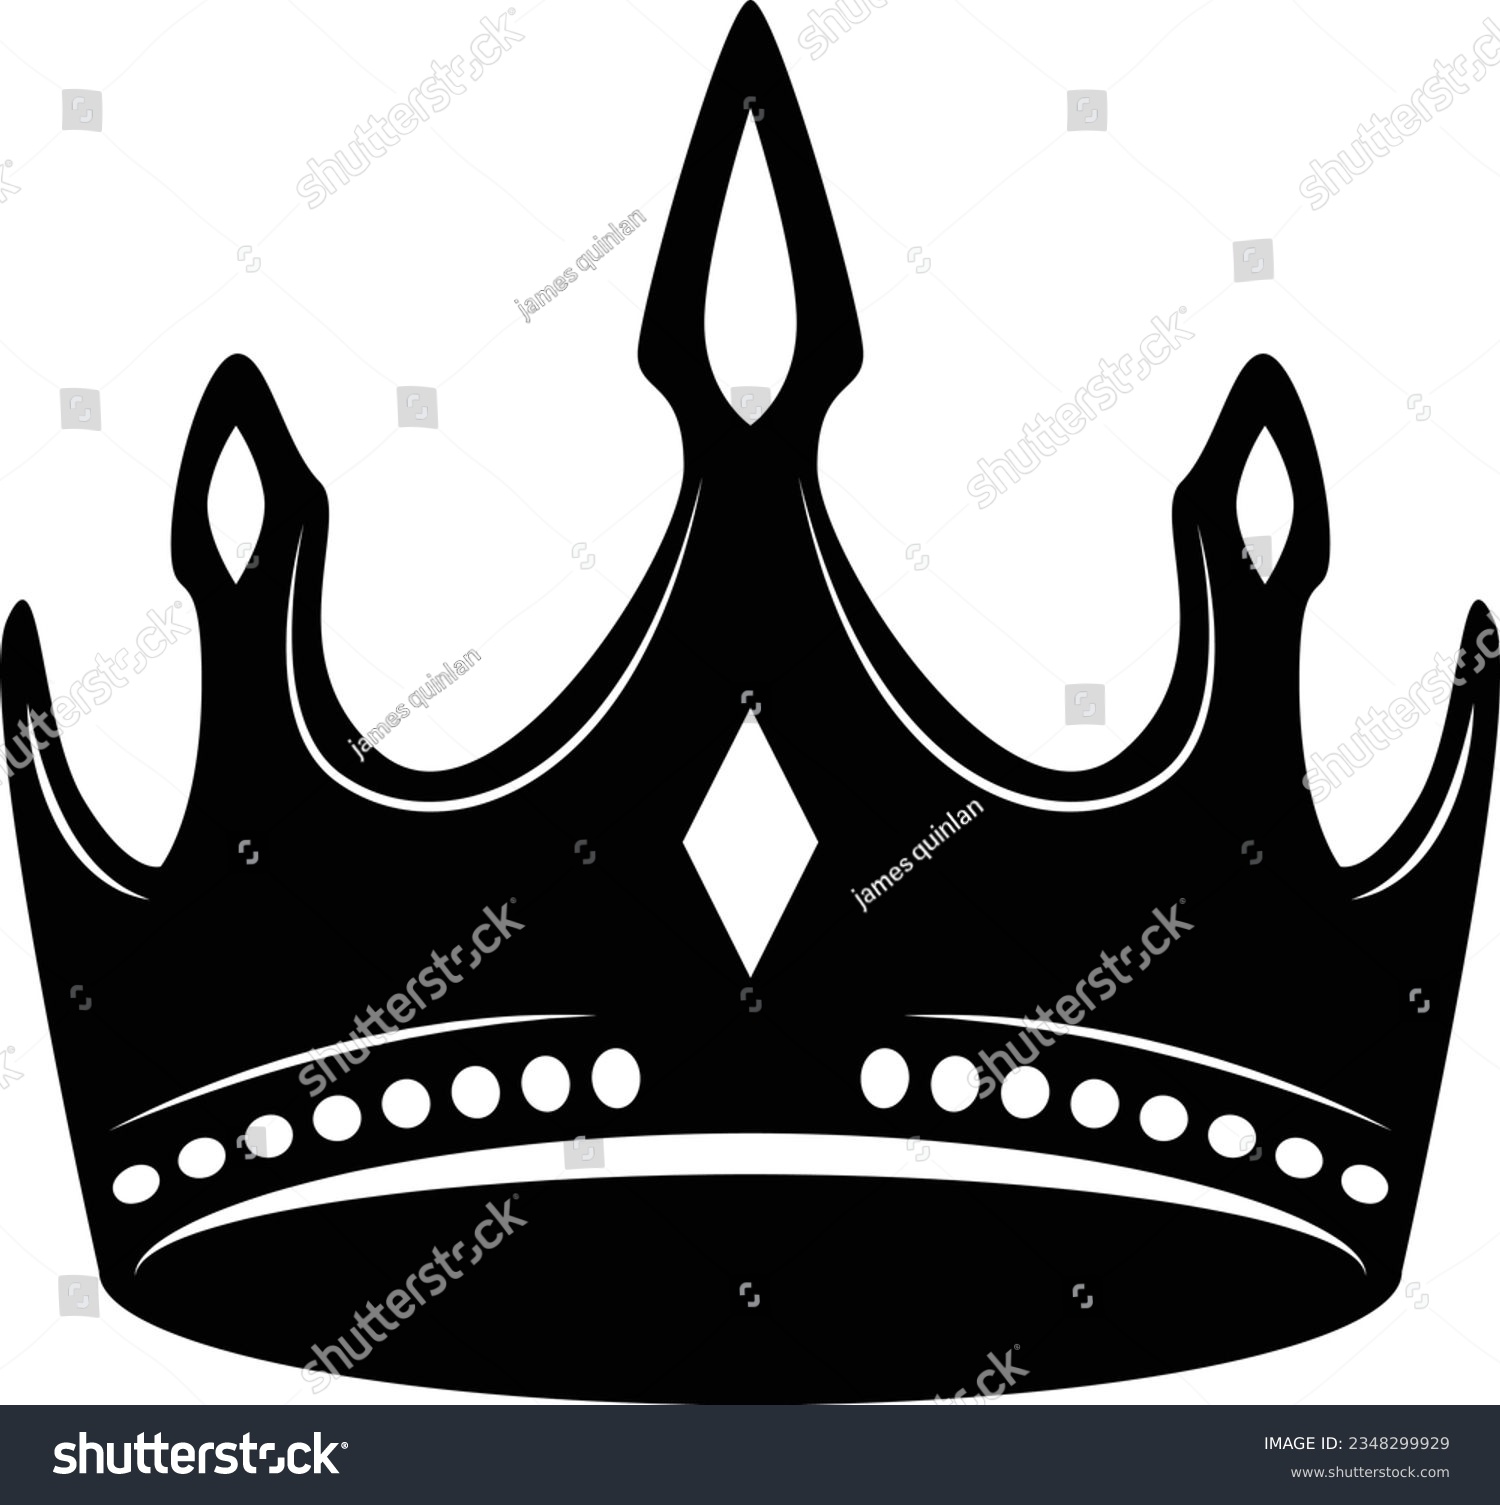 SVG of King crown svg vector illustration. Royal crown graphic isolated. svg